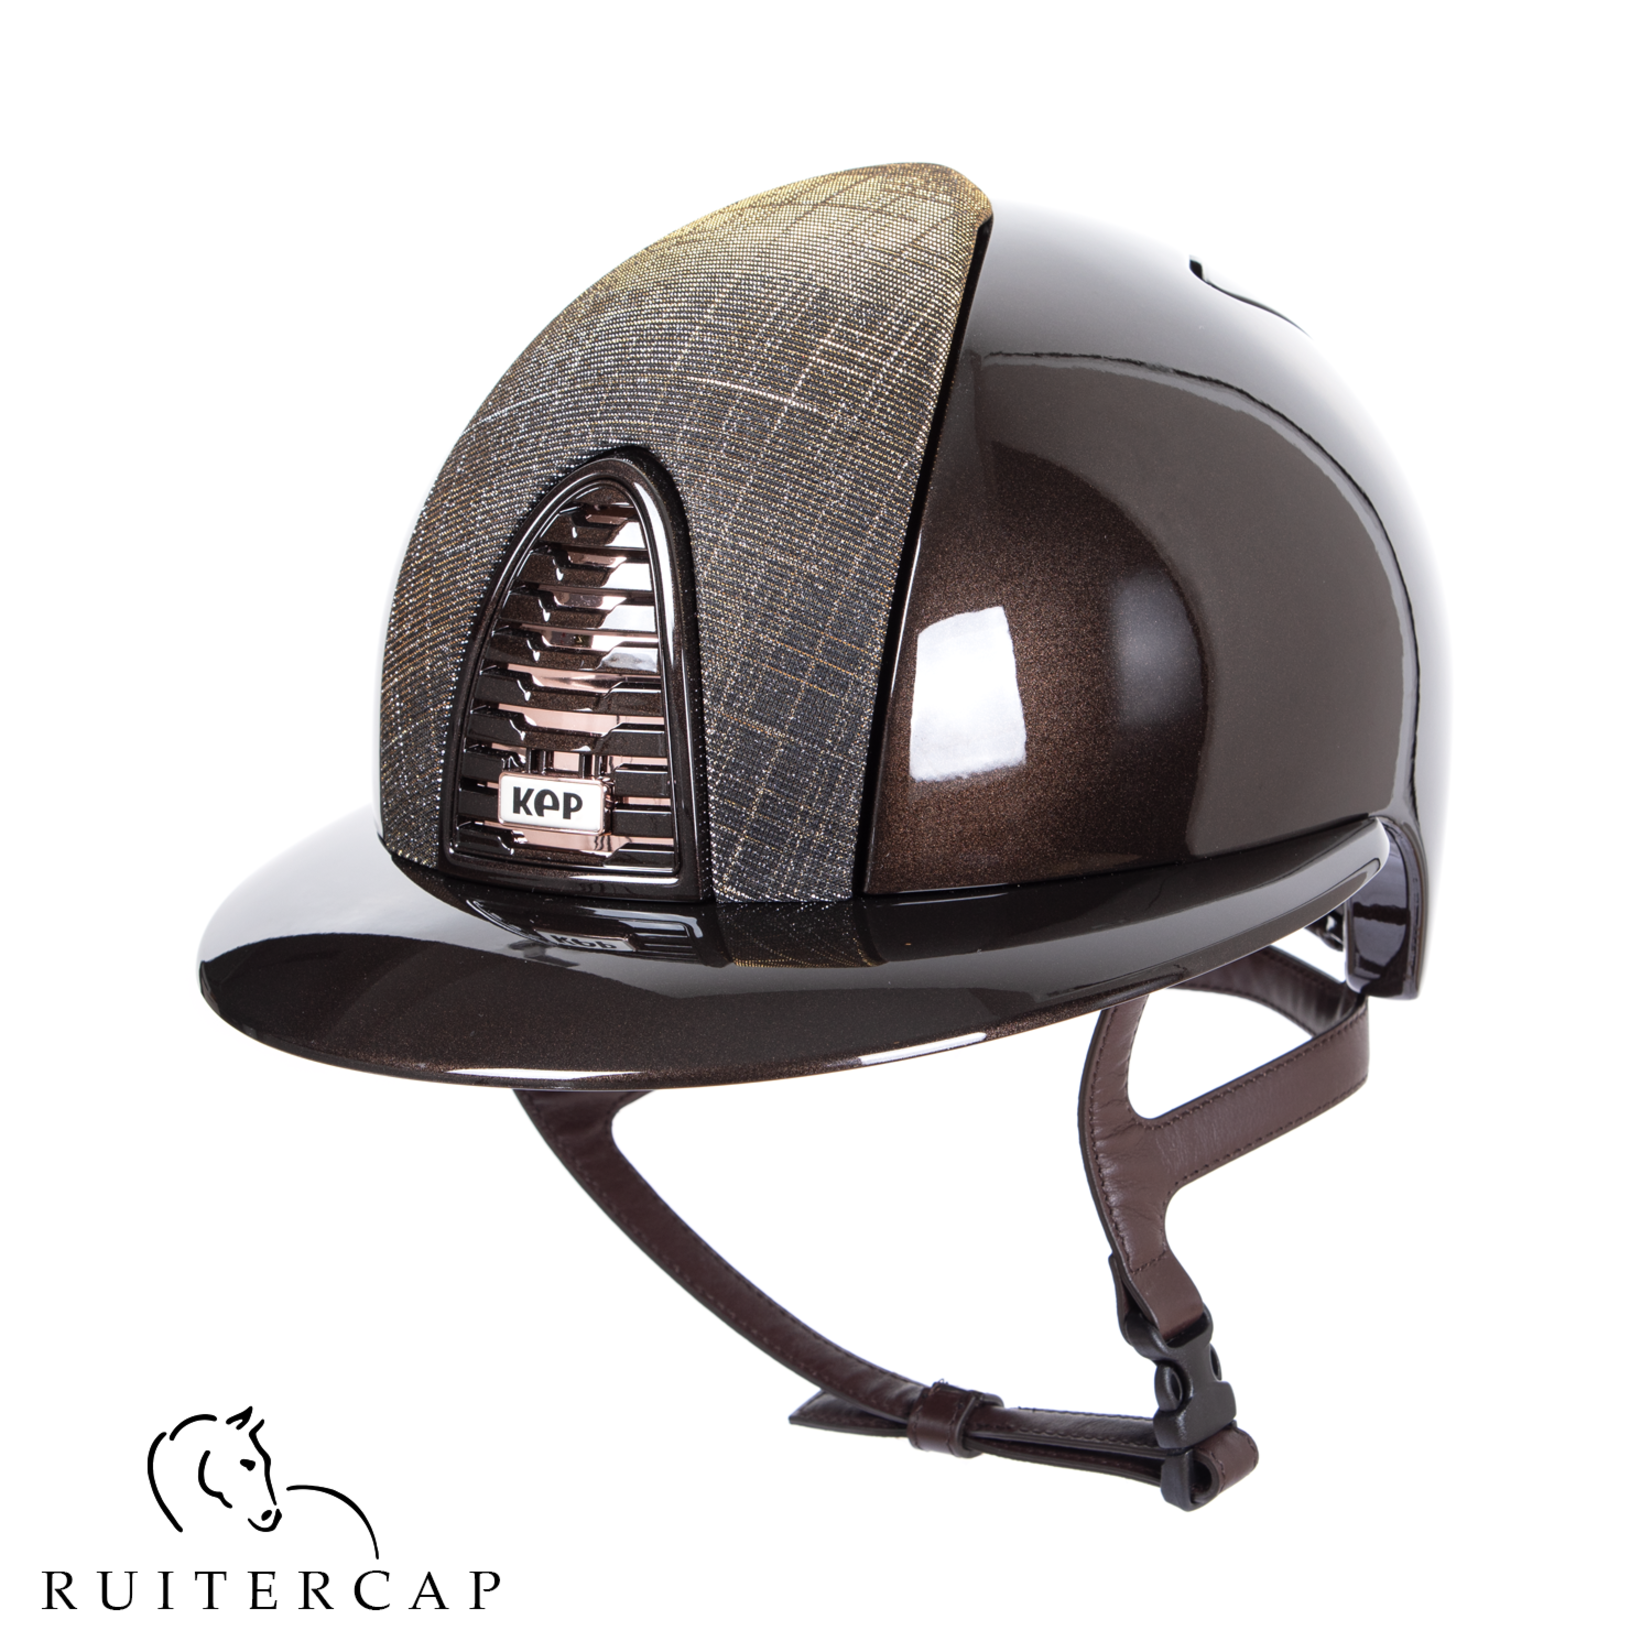 KEP Italia polish brown with galassia brown gold front - polo visor - rose gold button edge and sub grill